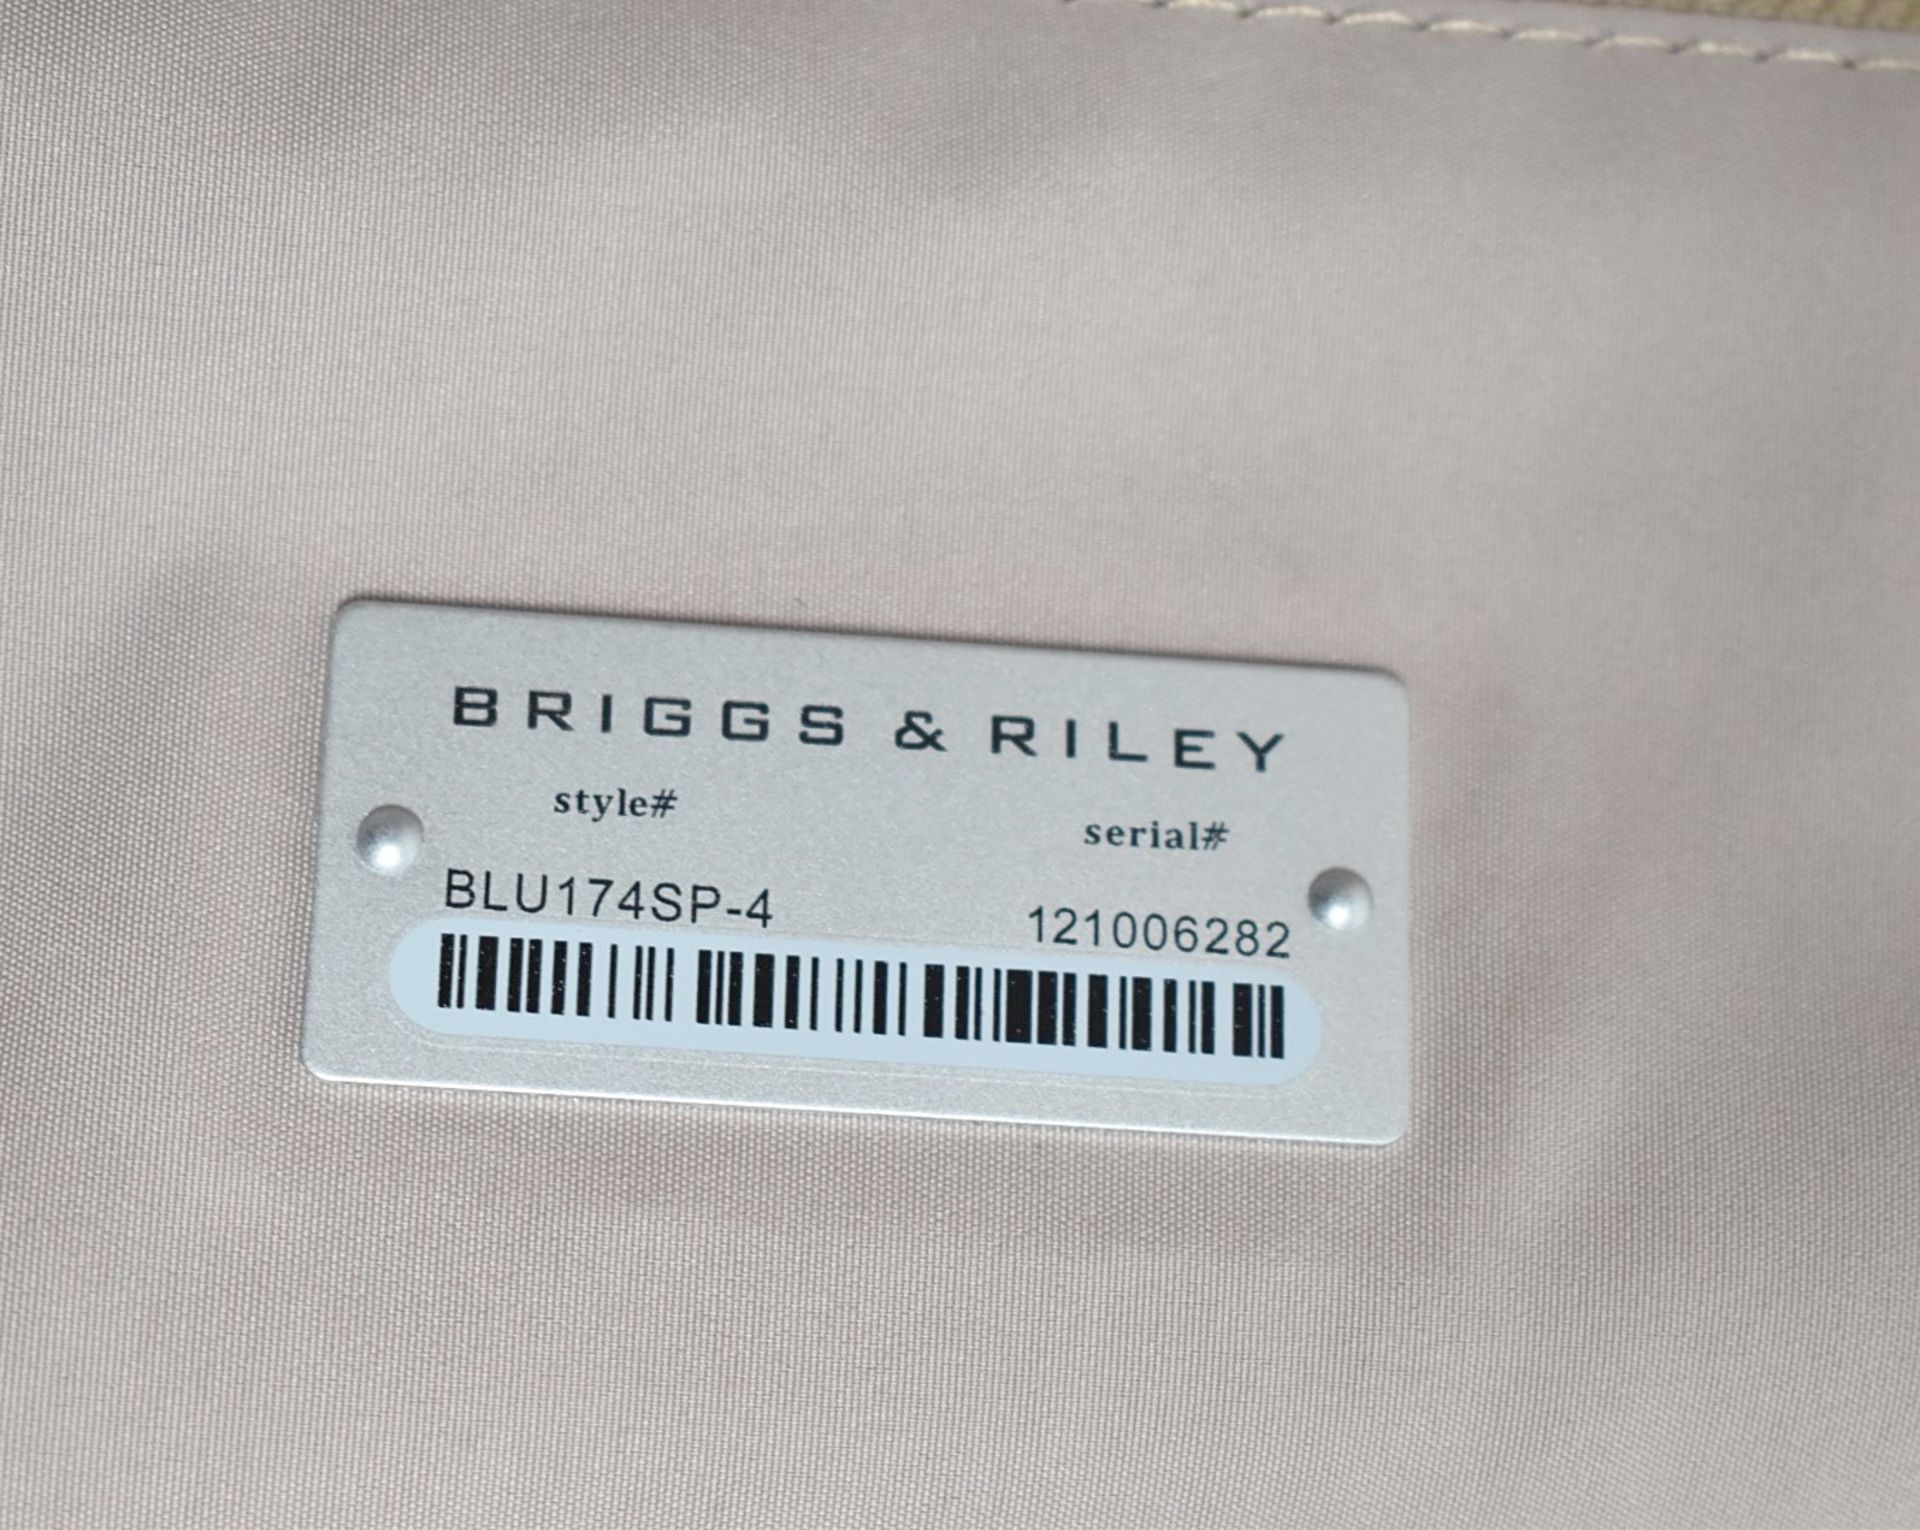 1 x BRIGGS & RILEY Wide Carry-On Baseline Garment Spinner Suitcase (40.5cm) - Original Price £629.00 - Image 22 of 24